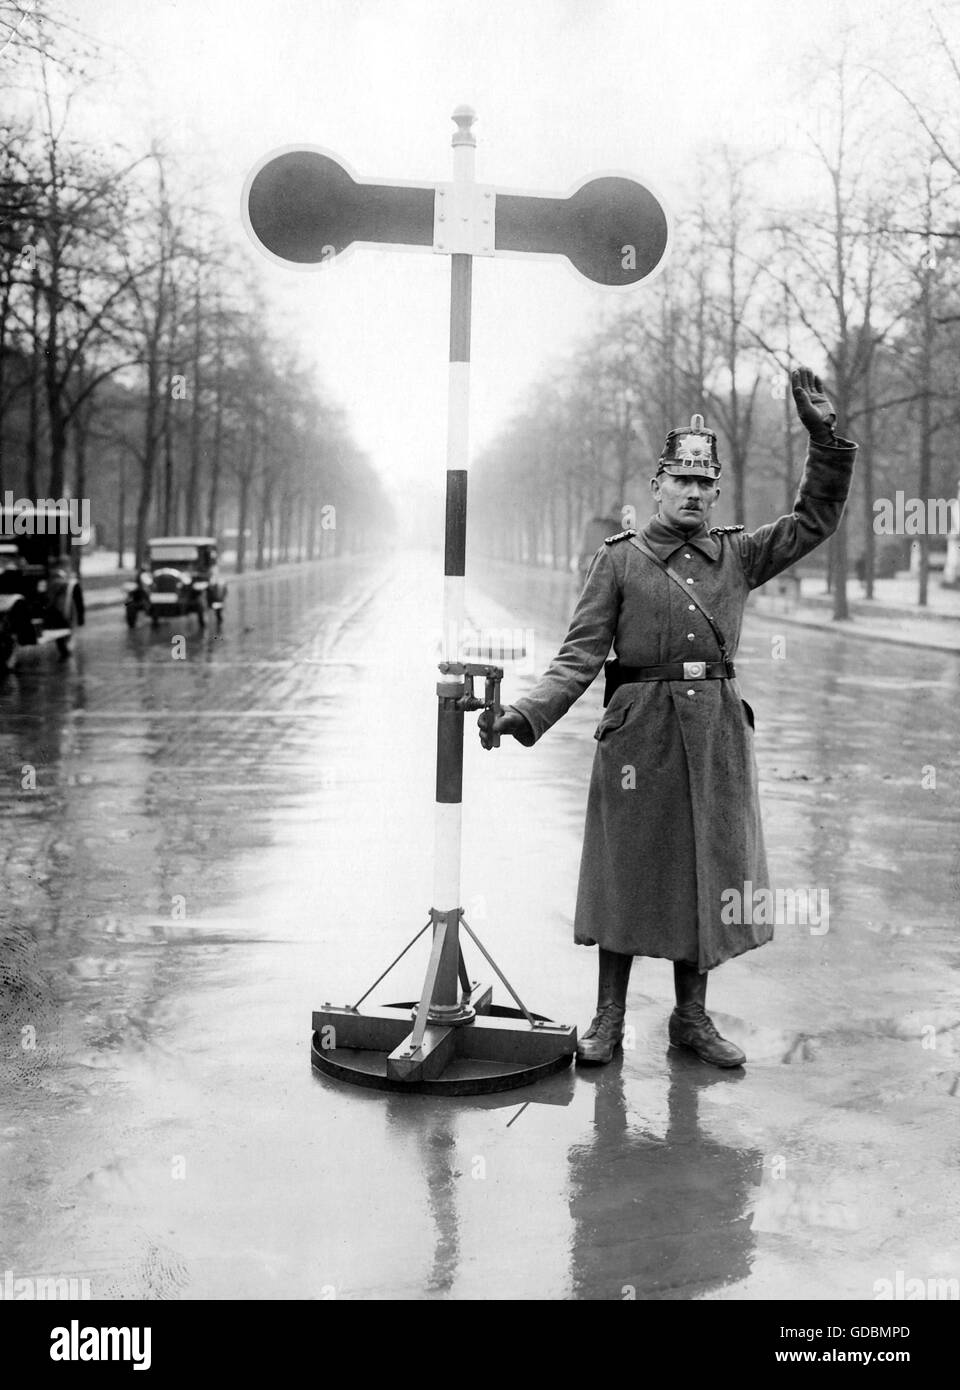 police, policemen, traffic policeman, crossing Charlottenburger Chausee and Siegesallee, Berlin, Germany, circa 1930, Additional-Rights-Clearences-Not Available Stock Photo